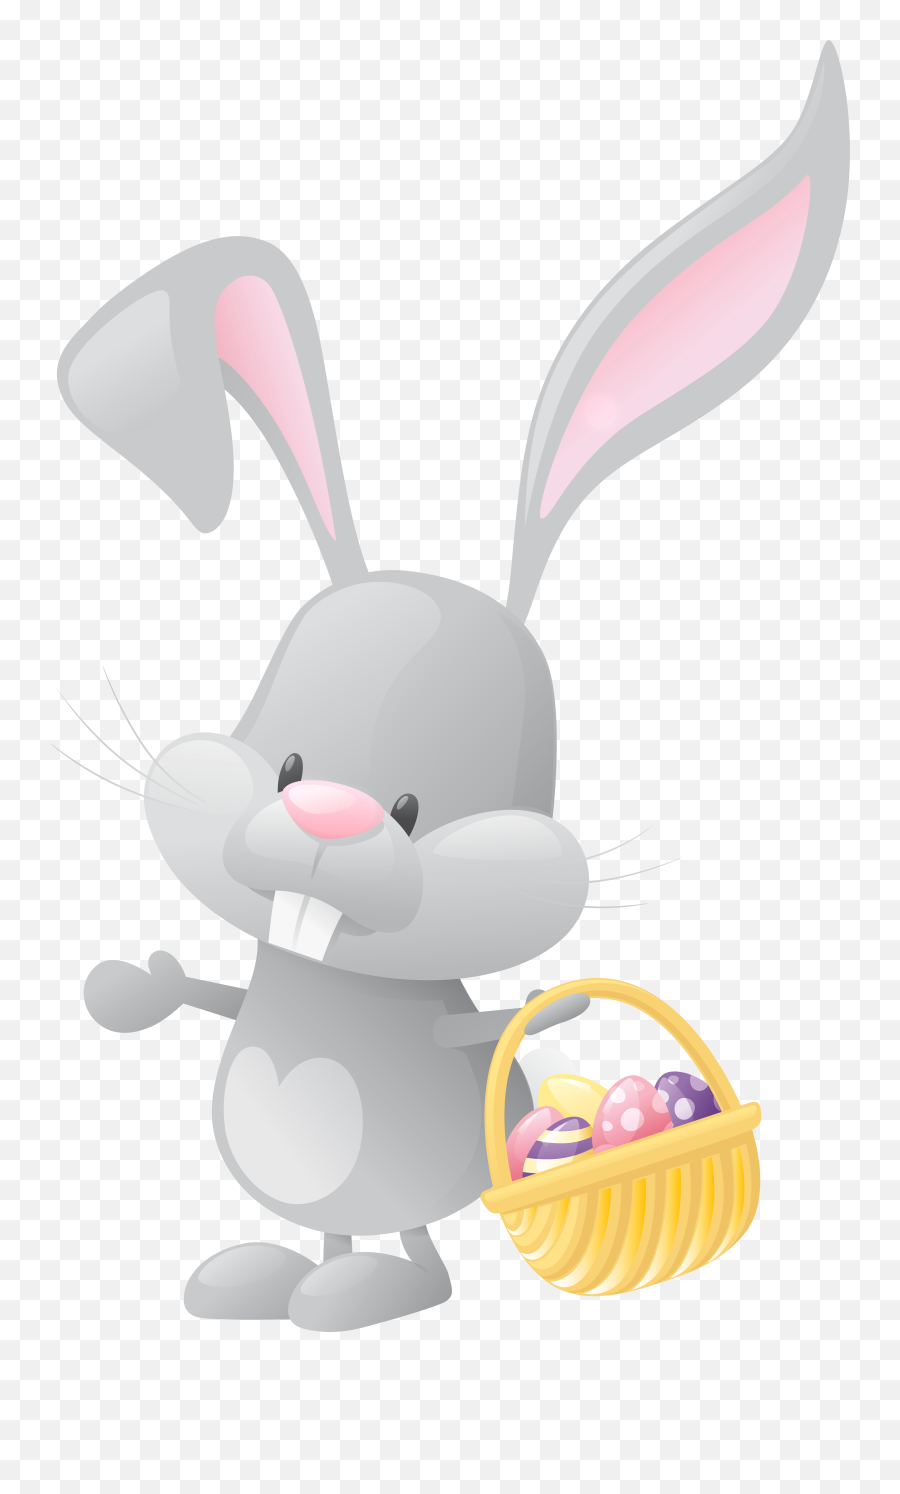 Tubes Lapins 21 - Easter Bunny Without Background Emoji,Bunny Ears Clipart